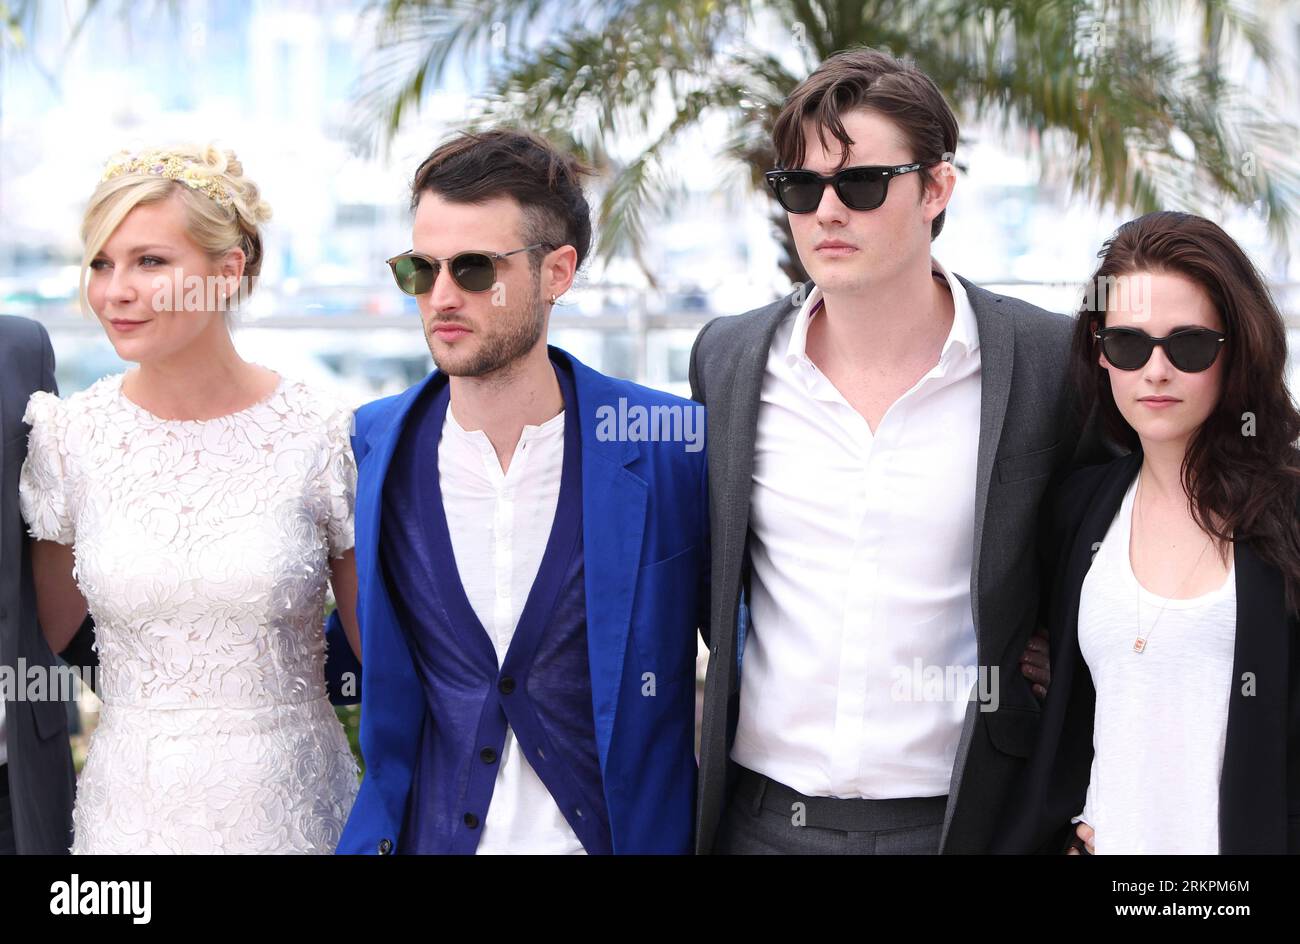 Bildnummer: 58021988  Datum: 23.05.2012  Copyright: imago/Xinhua (120523) -- CANNES, May 23, 2012 (Xinhua) --(L-R)US actress Kirsten Dunst, British actor Tom Sturridge, British actor Sam Riley, US actress Kristen Stewart pose during a photocall for On The Road , at the 65th Cannes Film Festival, southern France, May 23, 2012. The film will compete with the other 21 feature films for 2012 Golden Palm (Palme d Or), the most prestigious award of the 65th Cannes International Film Festival.(Xinhua/Gao Jing) FRANCE-CANNES-FILM FESTIVAL-PHOTOCALL-ON THE ROAD PUBLICATIONxNOTxINxCHN Kultur Entertainme Stock Photo